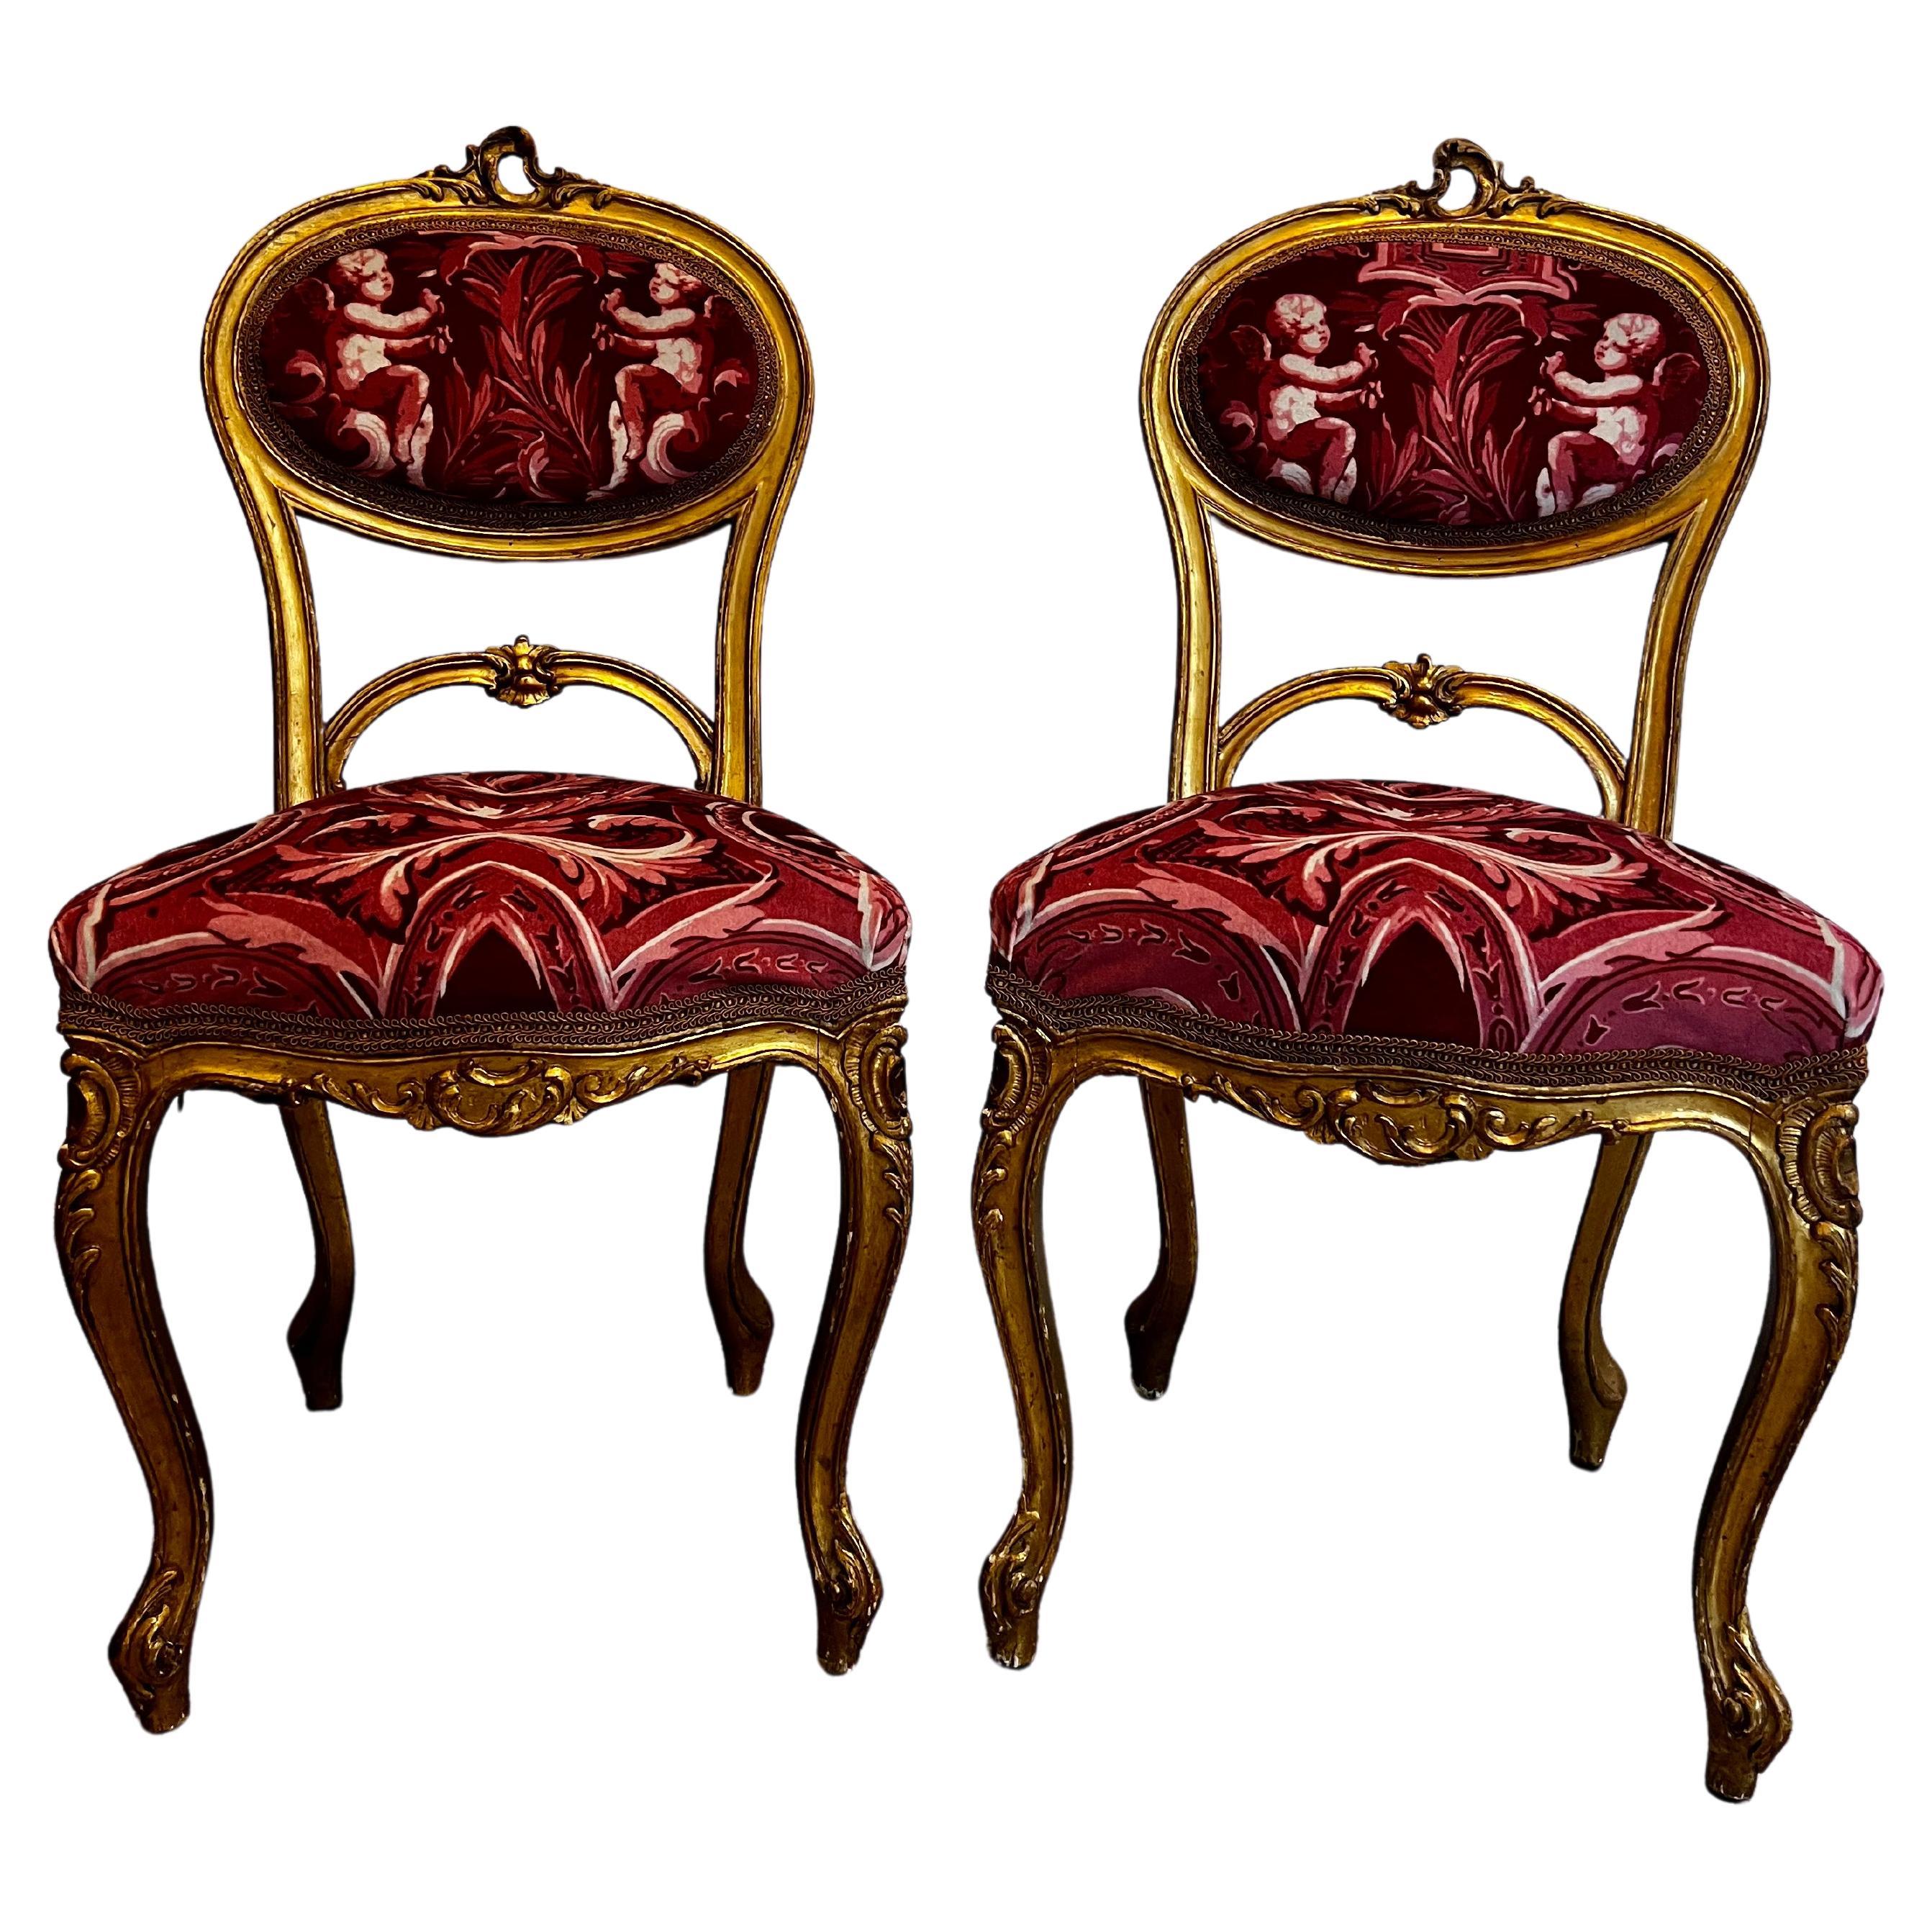 Set of Antique Early 19th Century Louis XVI Salon Ladies Chairs For Sale